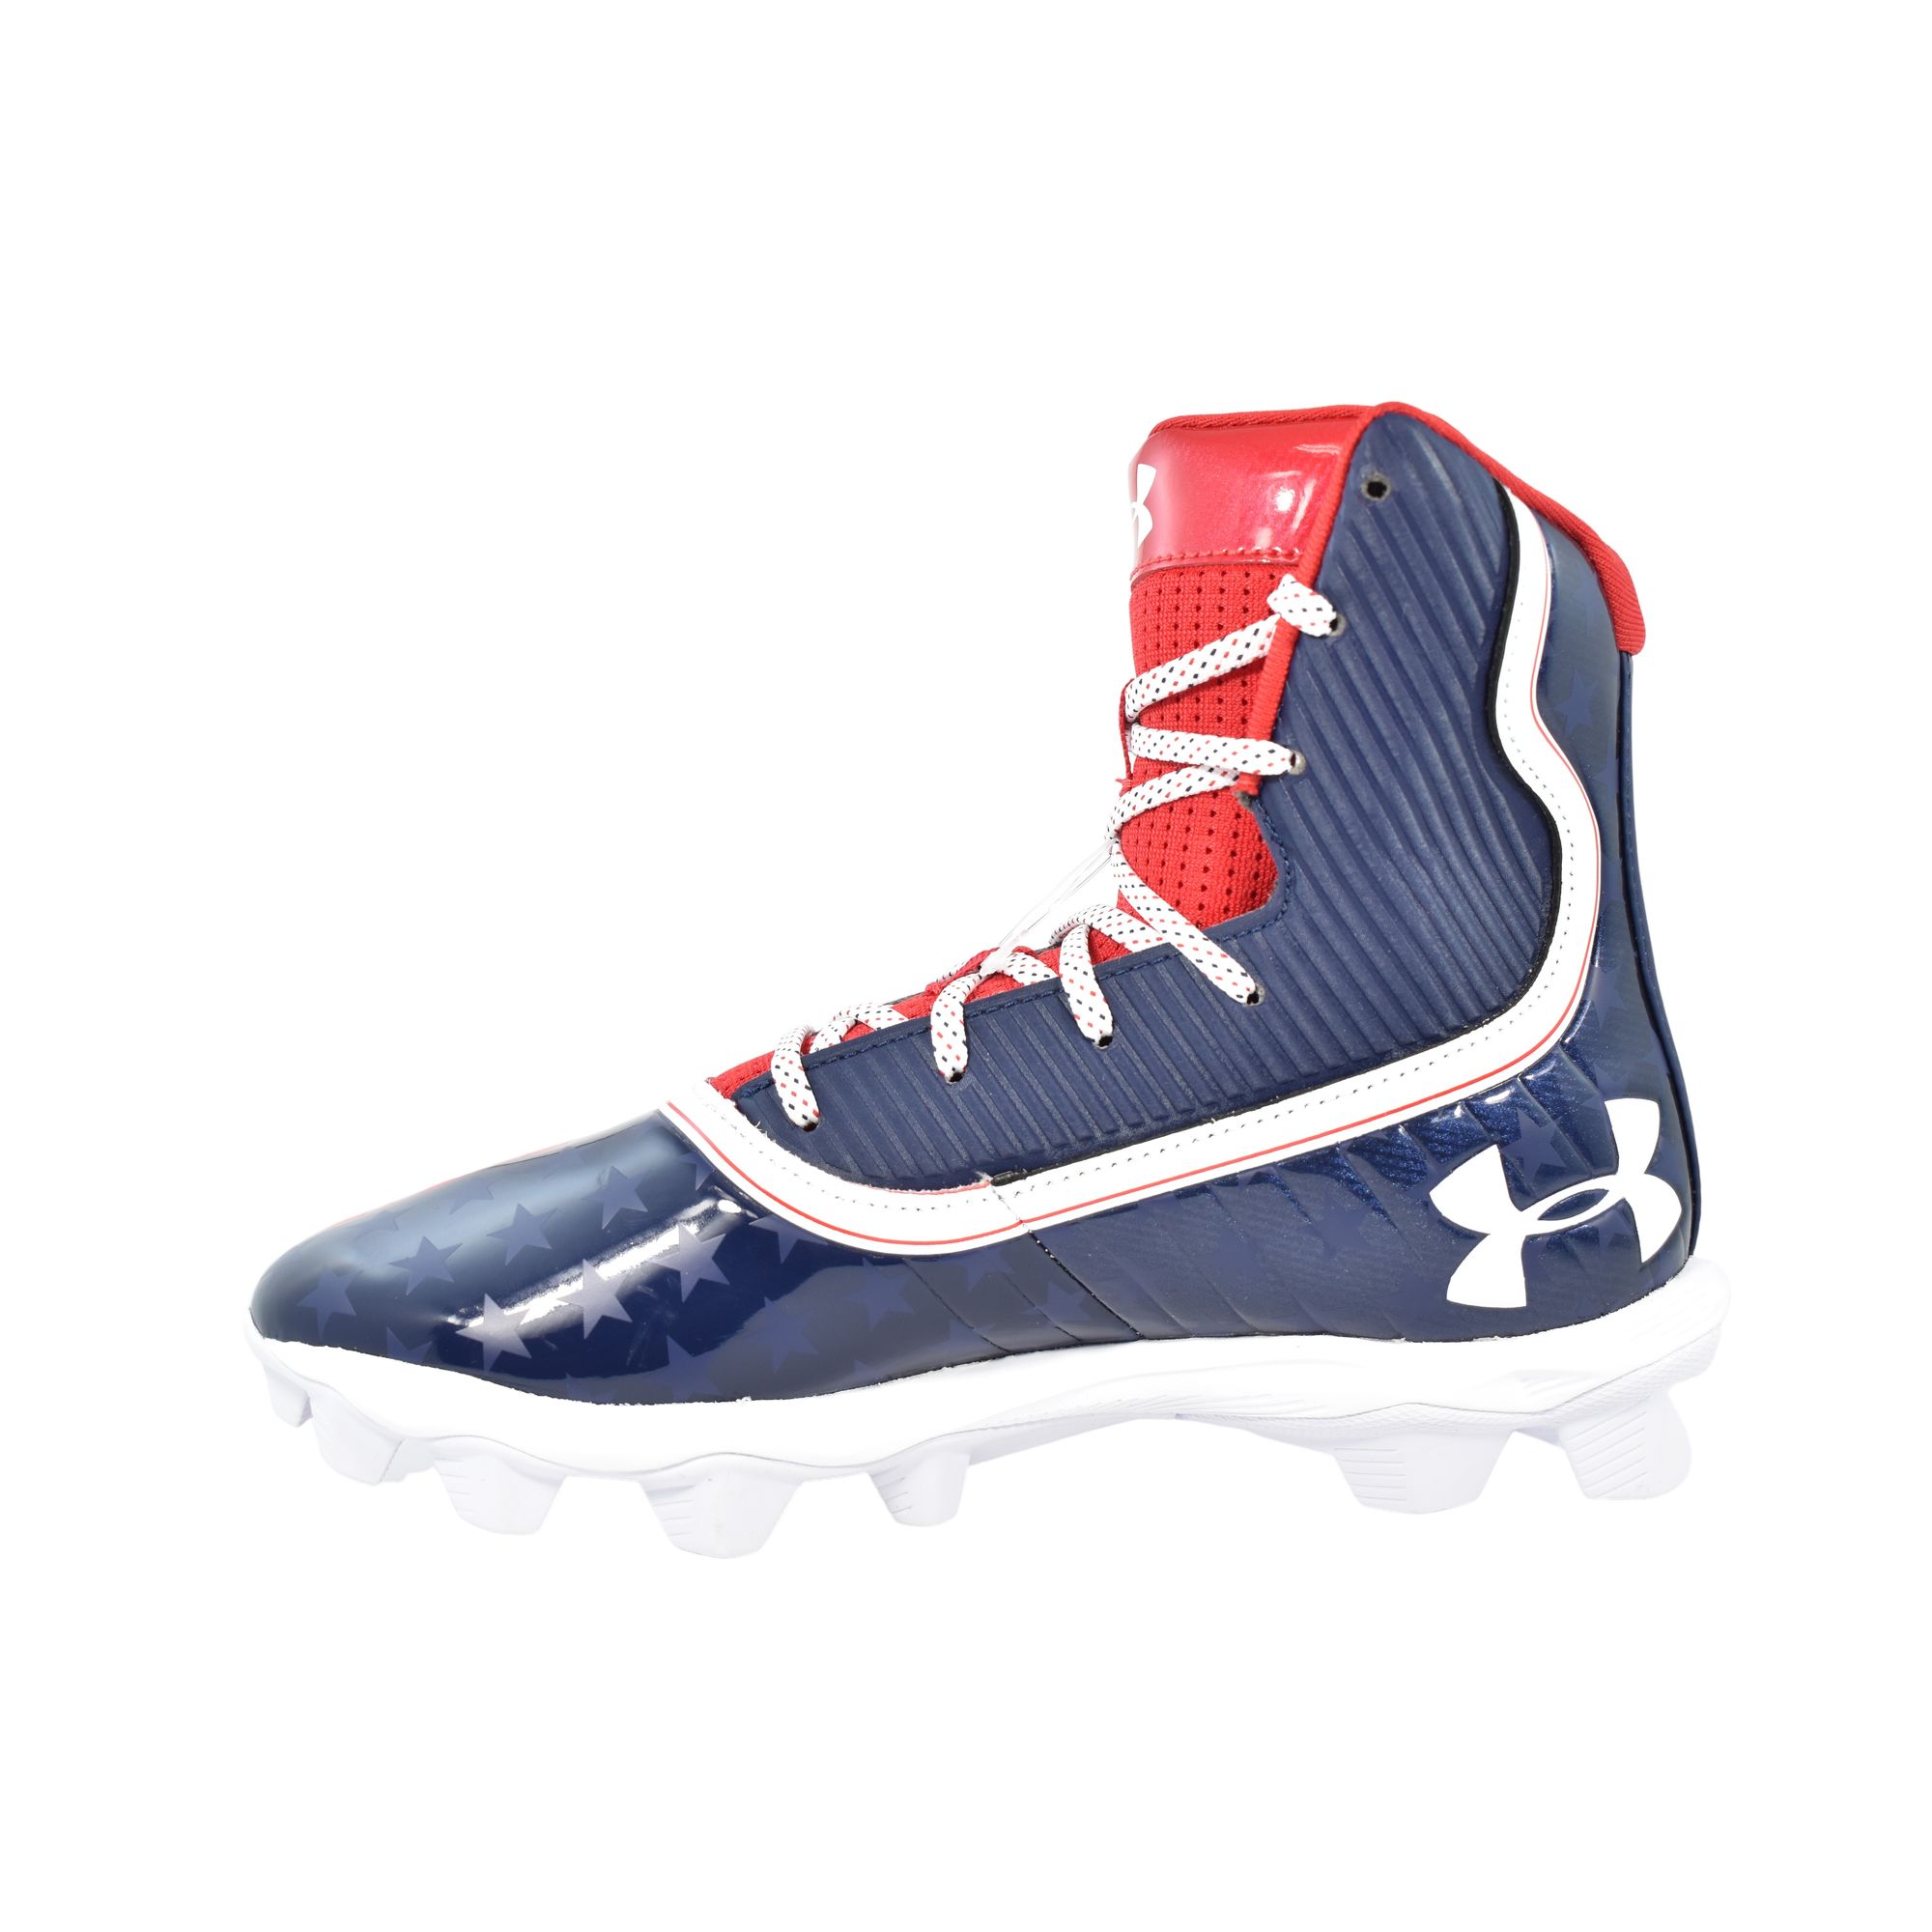 Under Armour Highlight Limited Edition USA Youth Football Cleats 3021200-600 